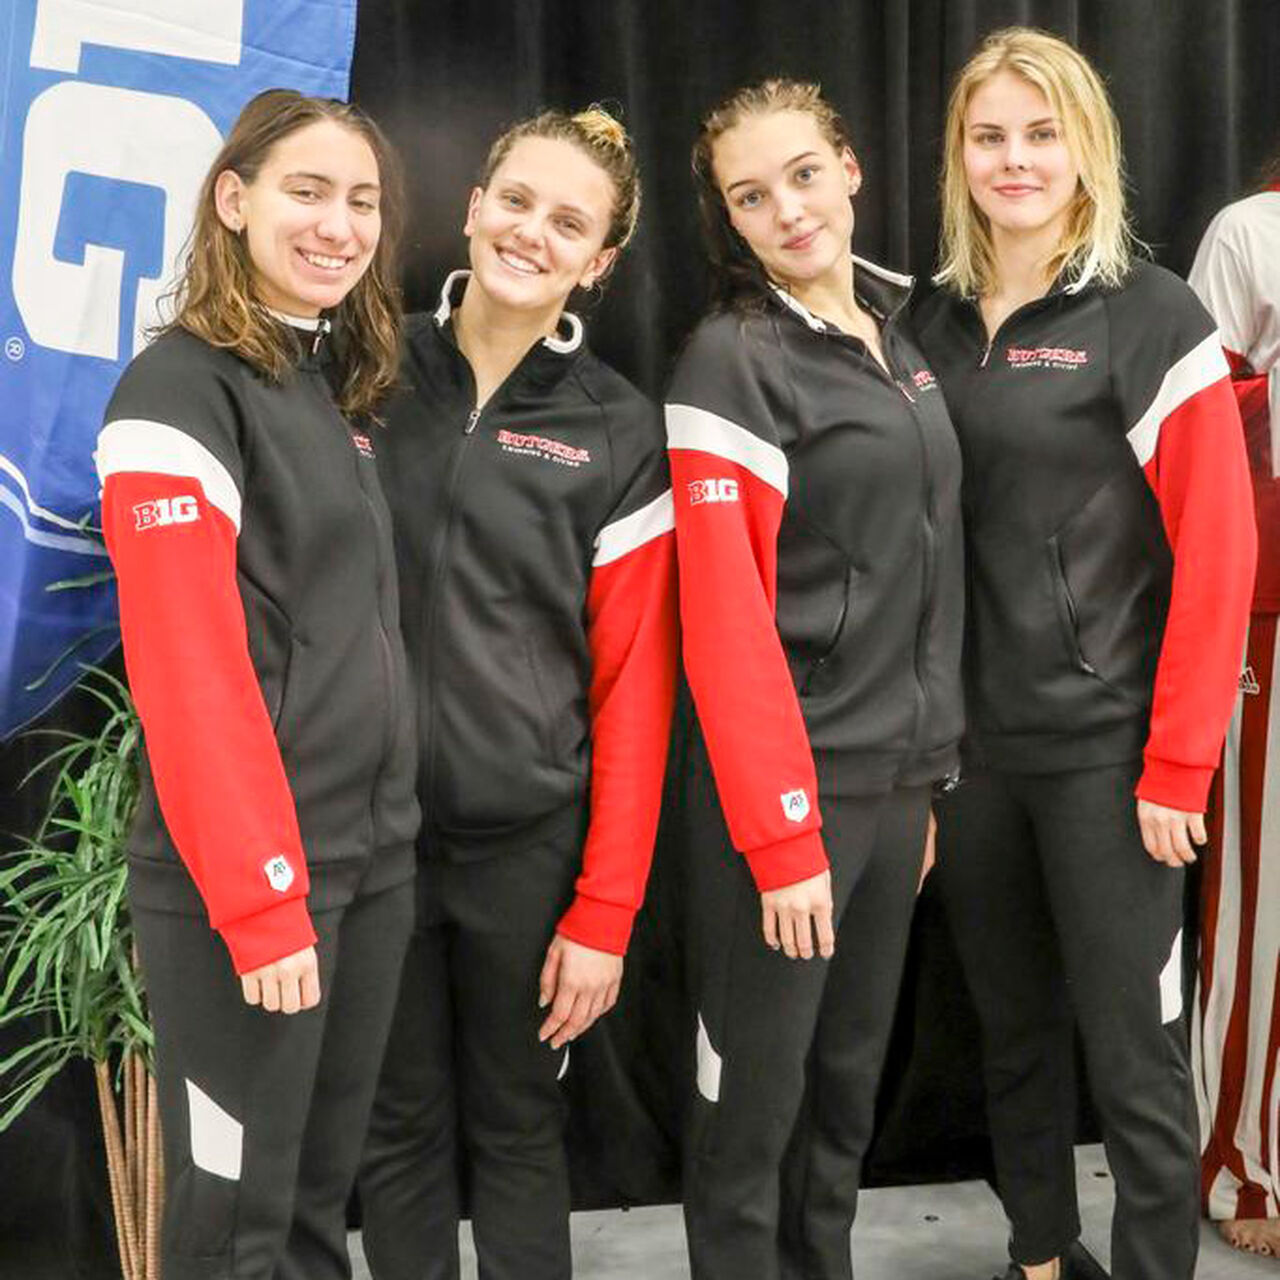 Four Rutgers Women's Swimming and Diving team members standing and smiling for the camera image number 0